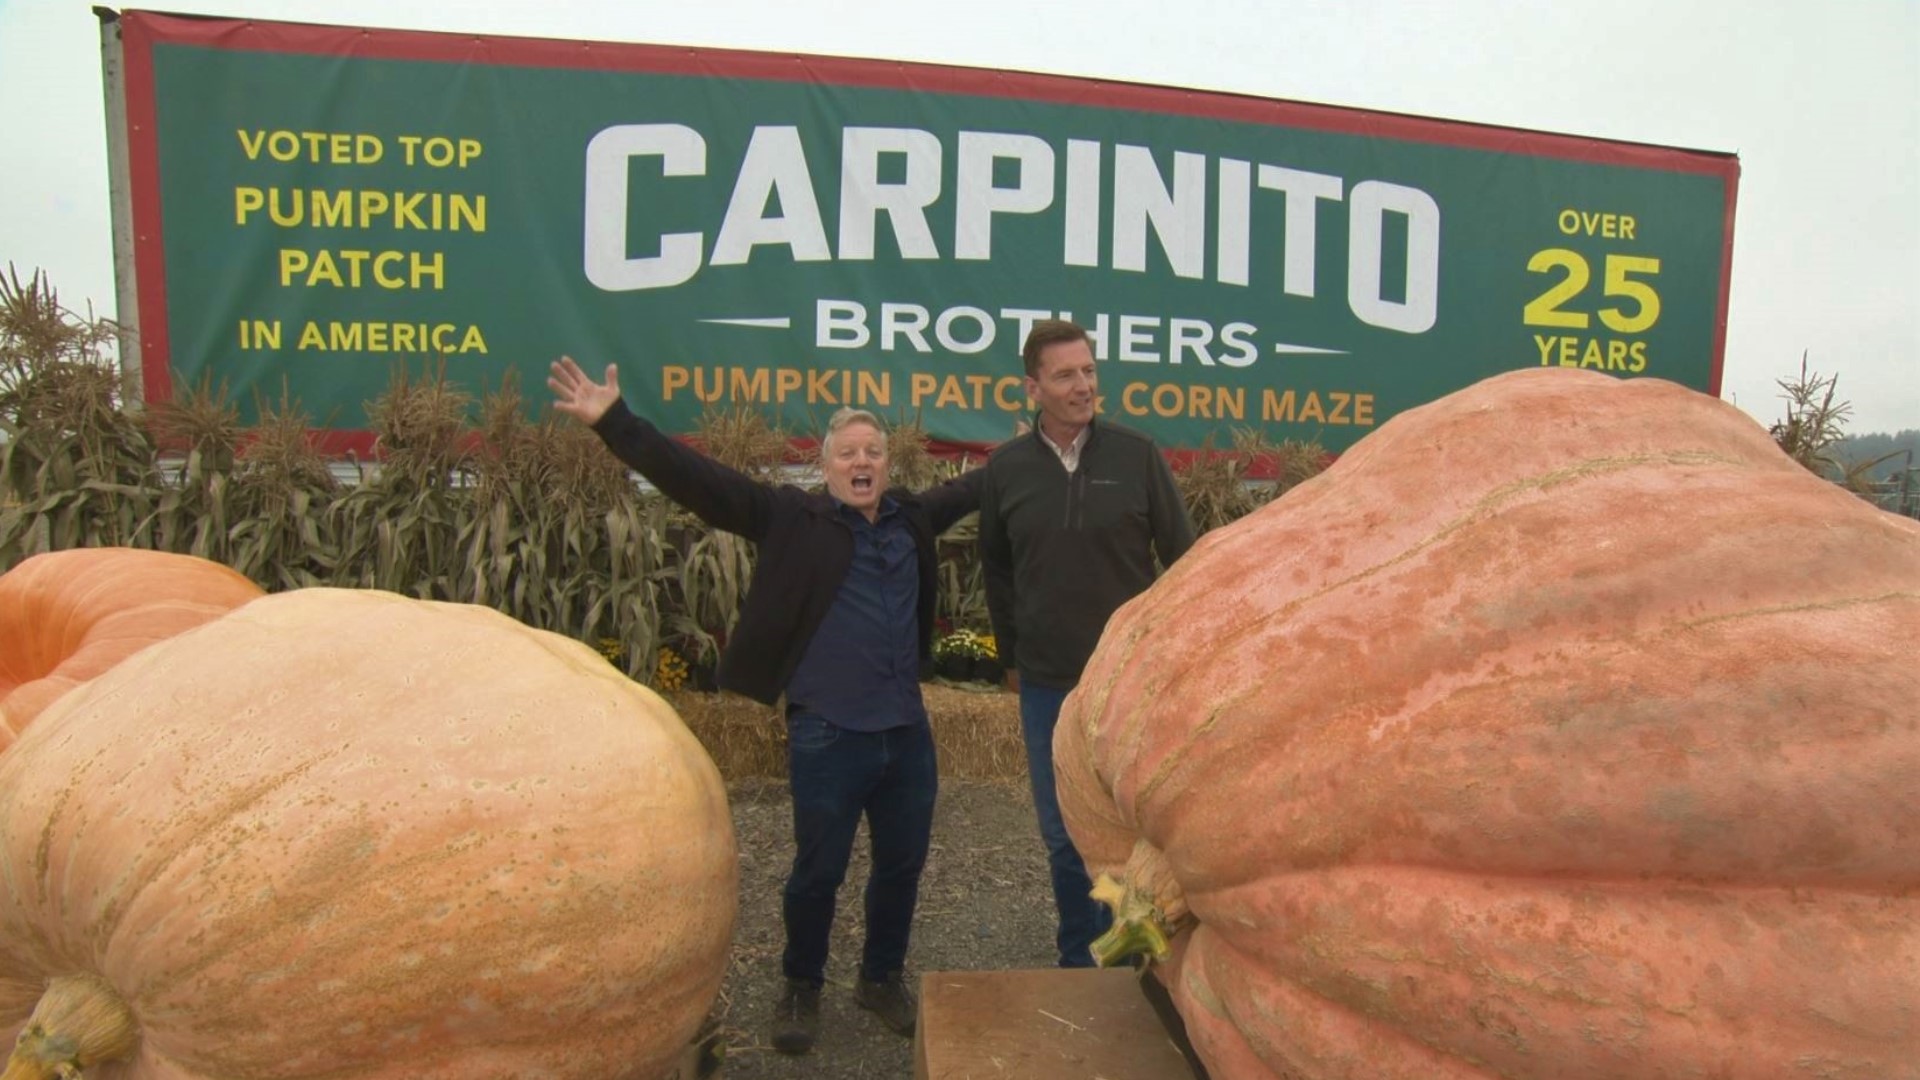 Gigantic pumpkins and a massive corn maze star in Carpinito Brothers' annual autumn spectacular. #k5evening